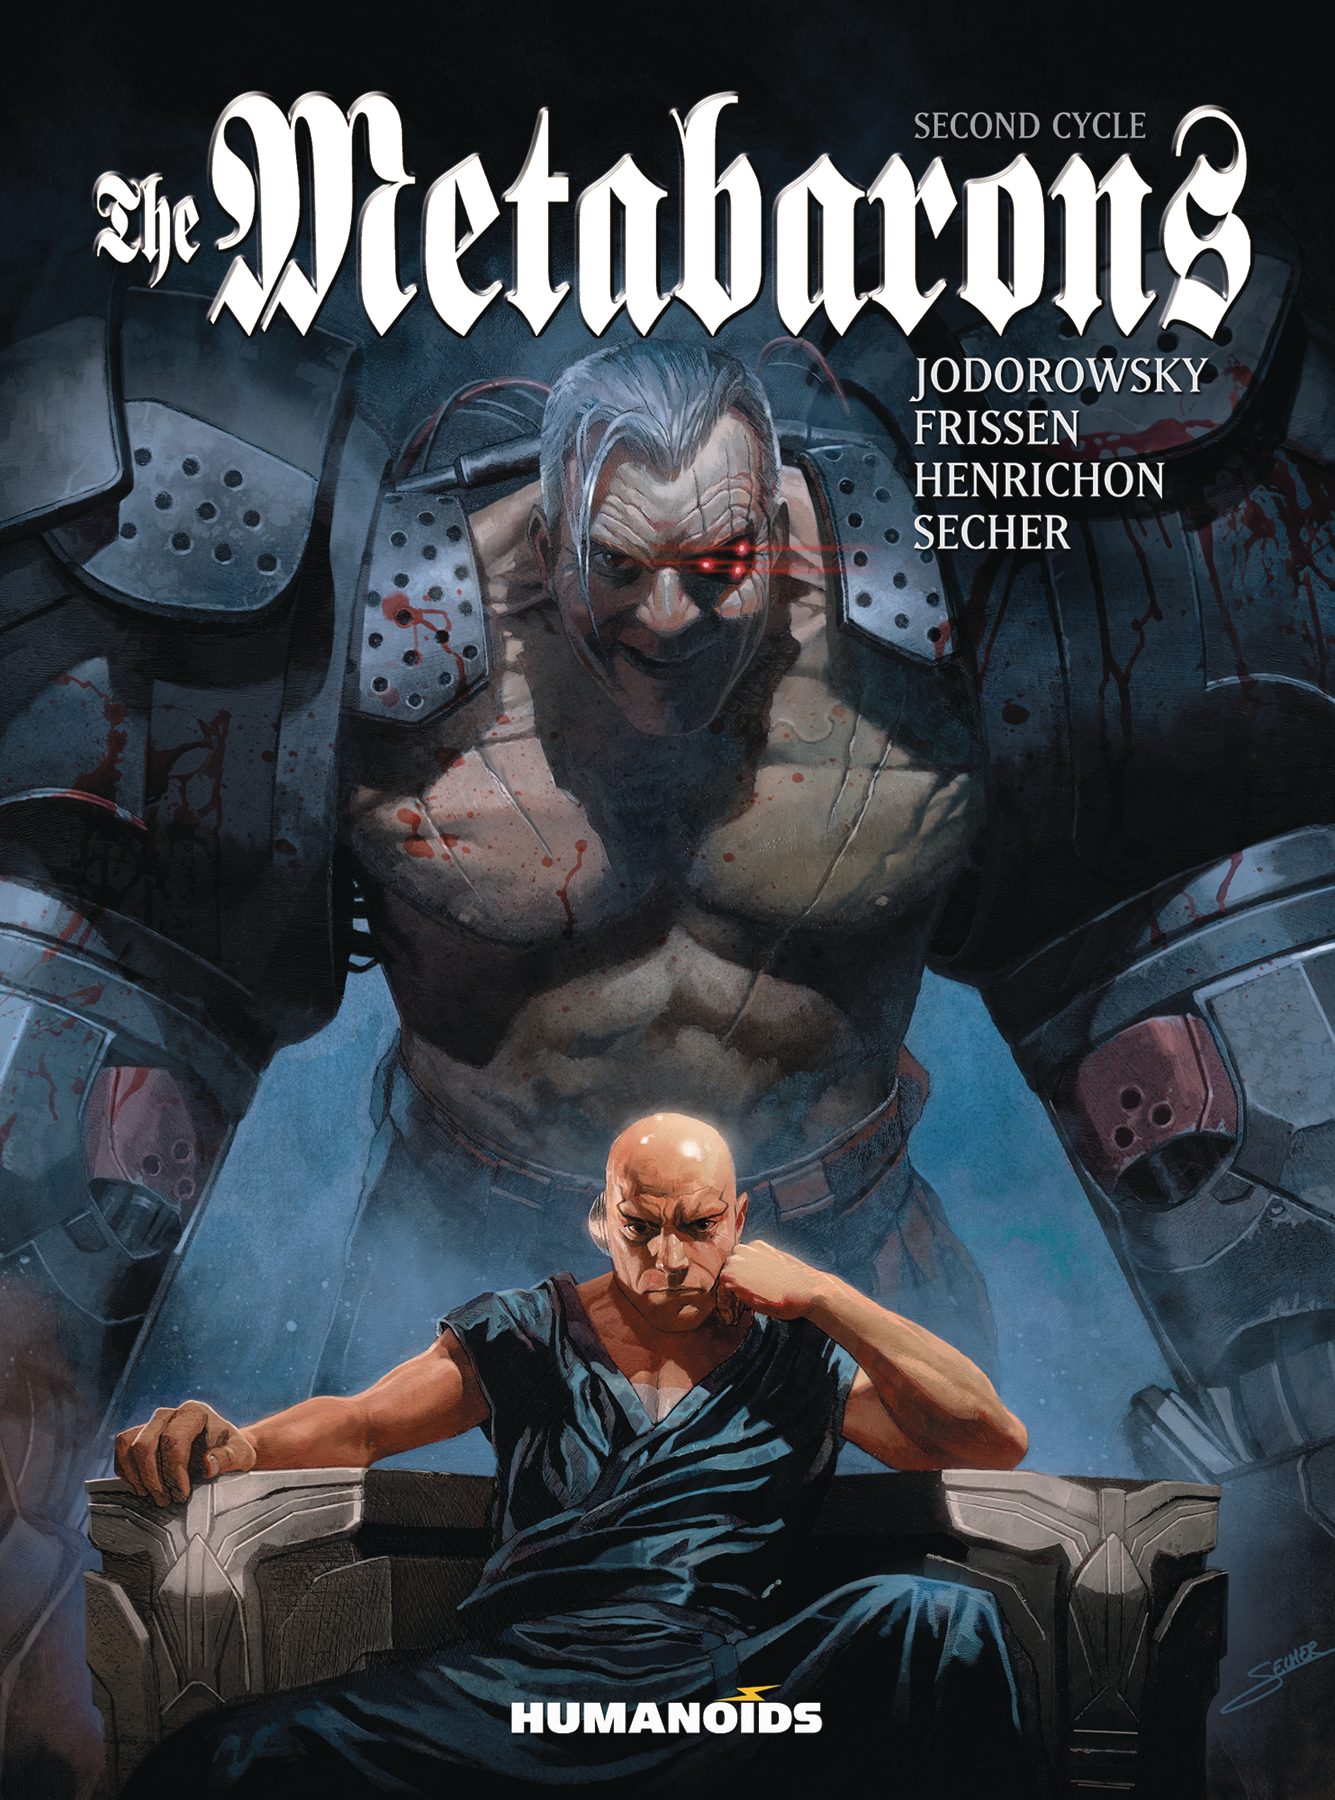 Metabarons Second Cycle h/c